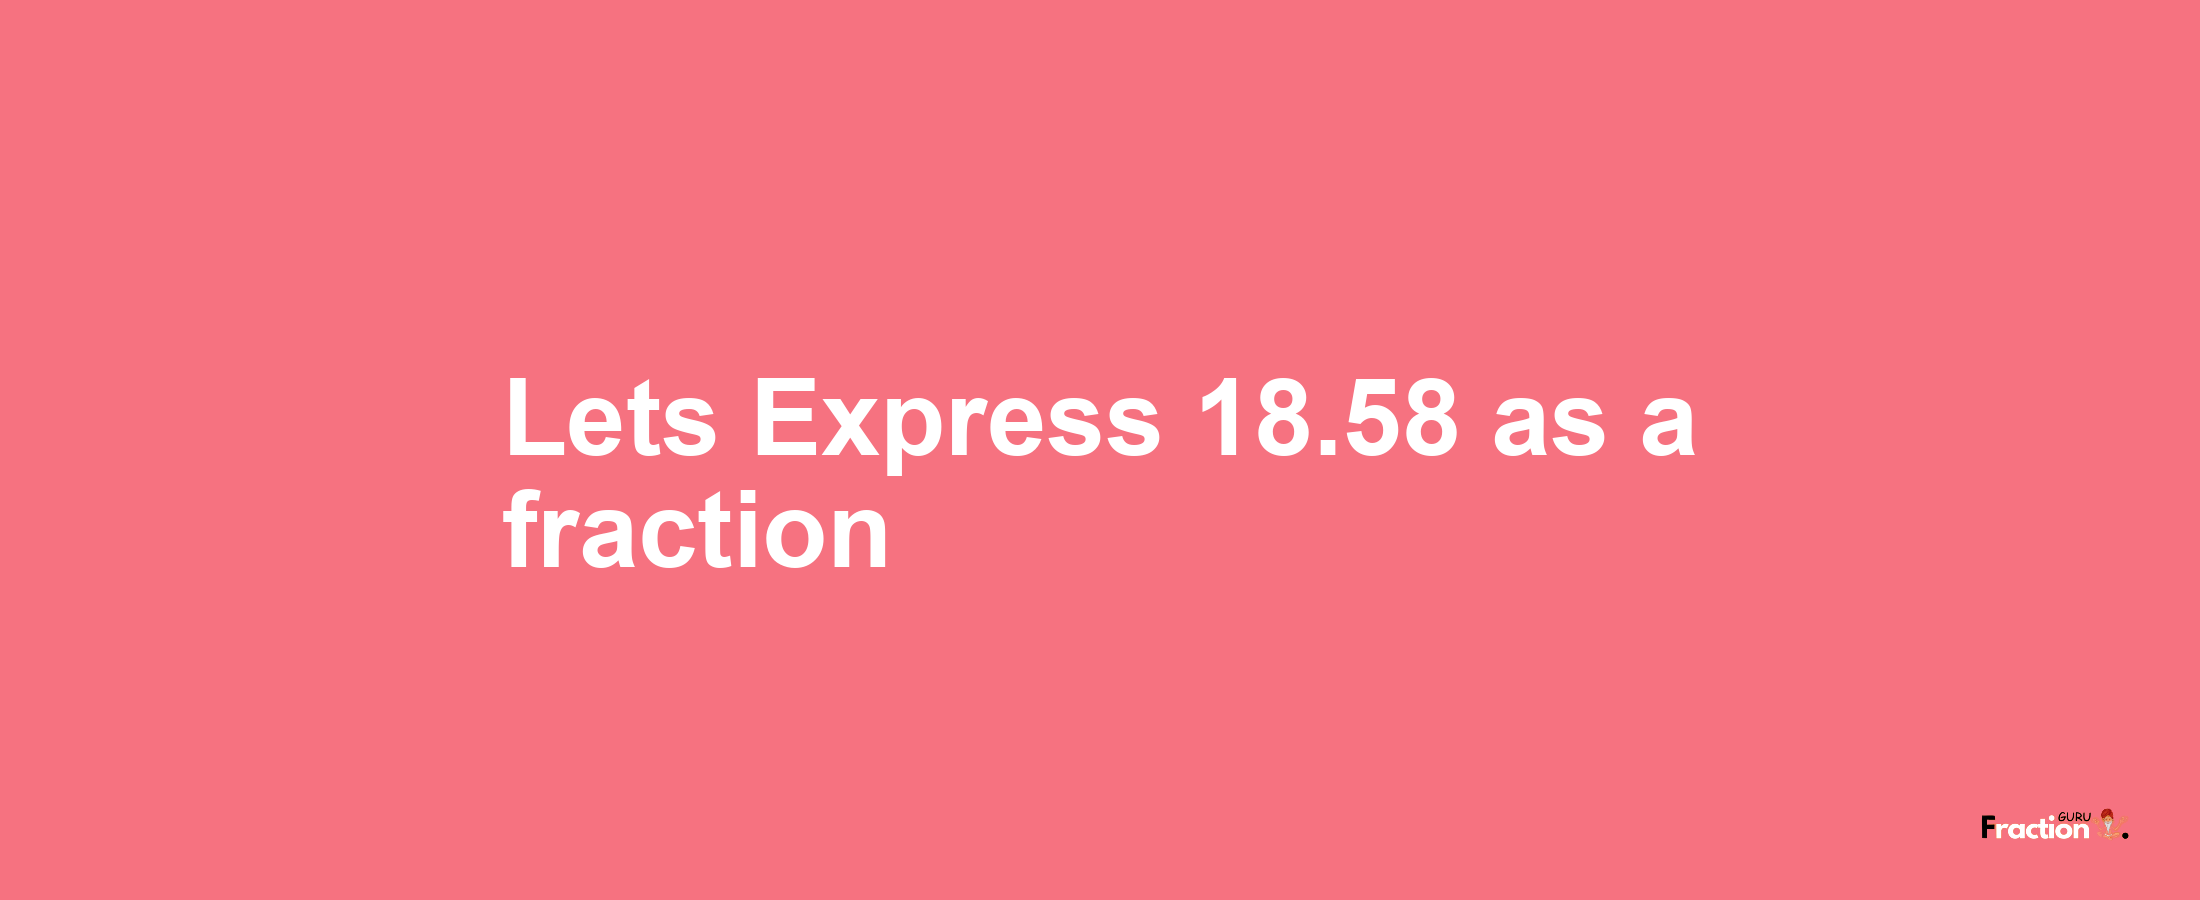 Lets Express 18.58 as afraction